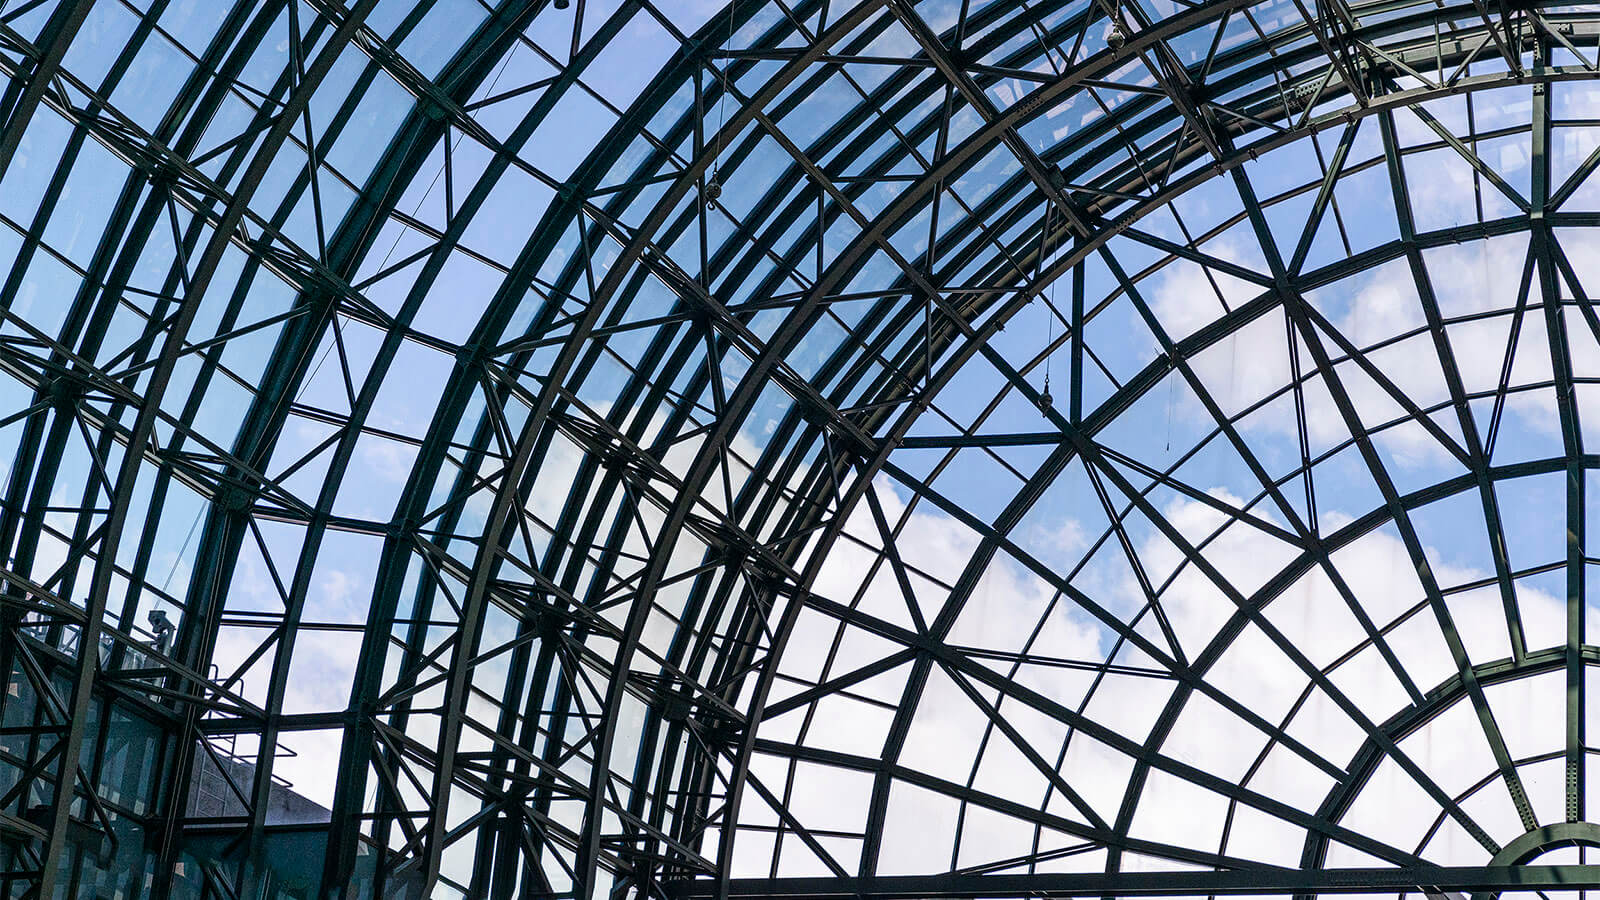 Photo shot through the roof of the glass-topped Winter Garden